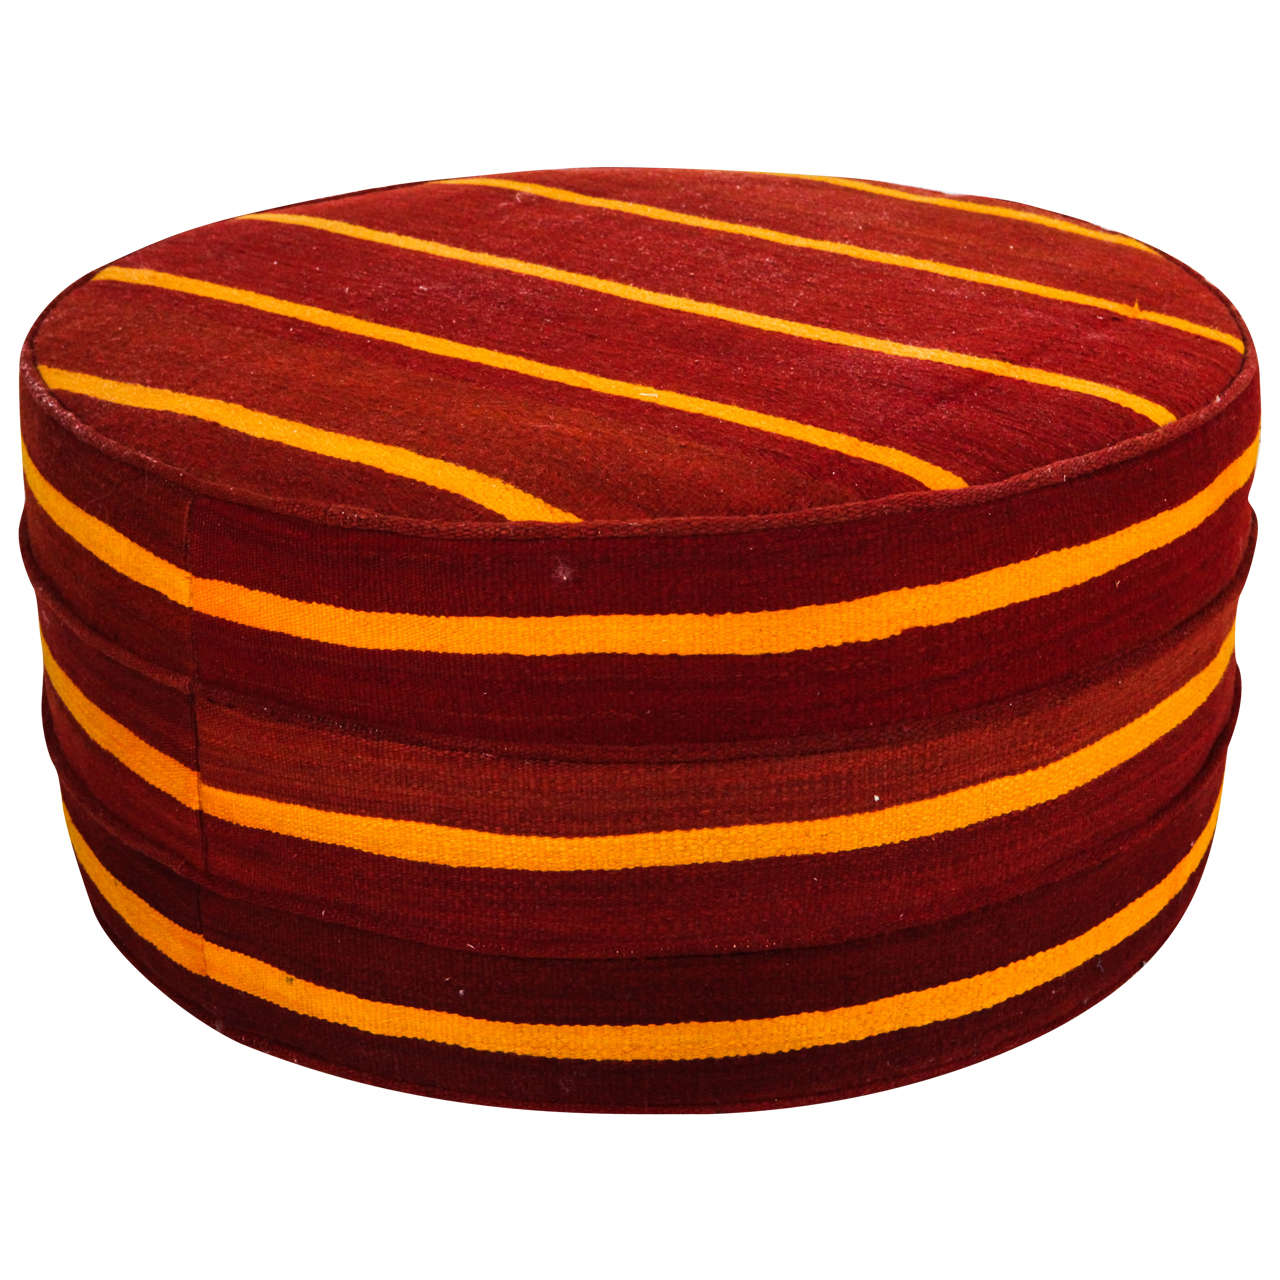 Round Hassock Ottoman Upholstered in Vintage Striped Kilim Rug